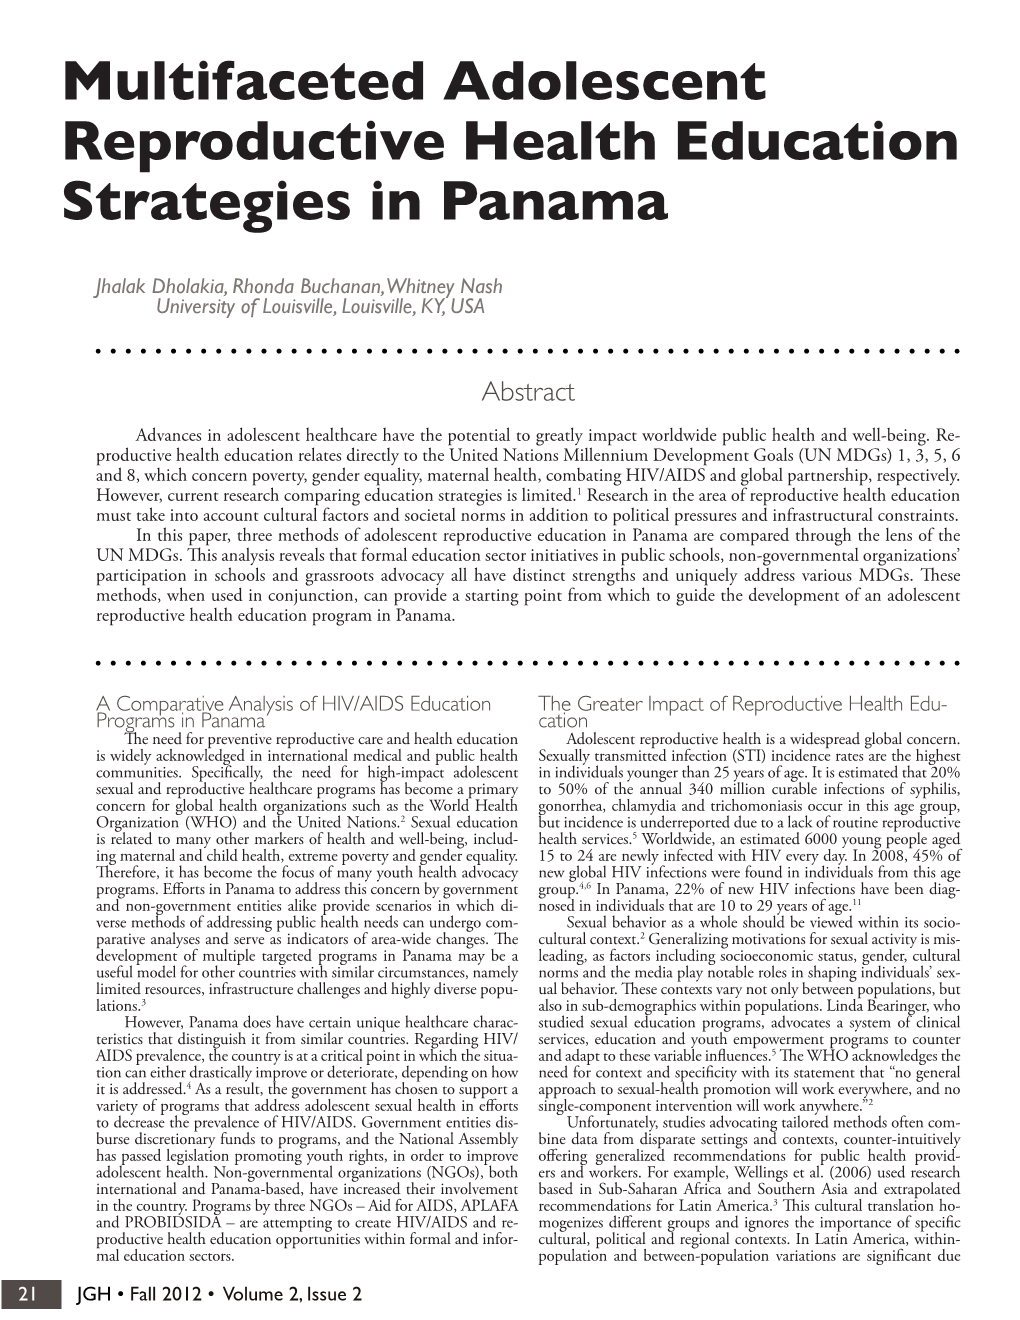 Multifaceted Adolescent Reproductive Health Education Strategies in Panama